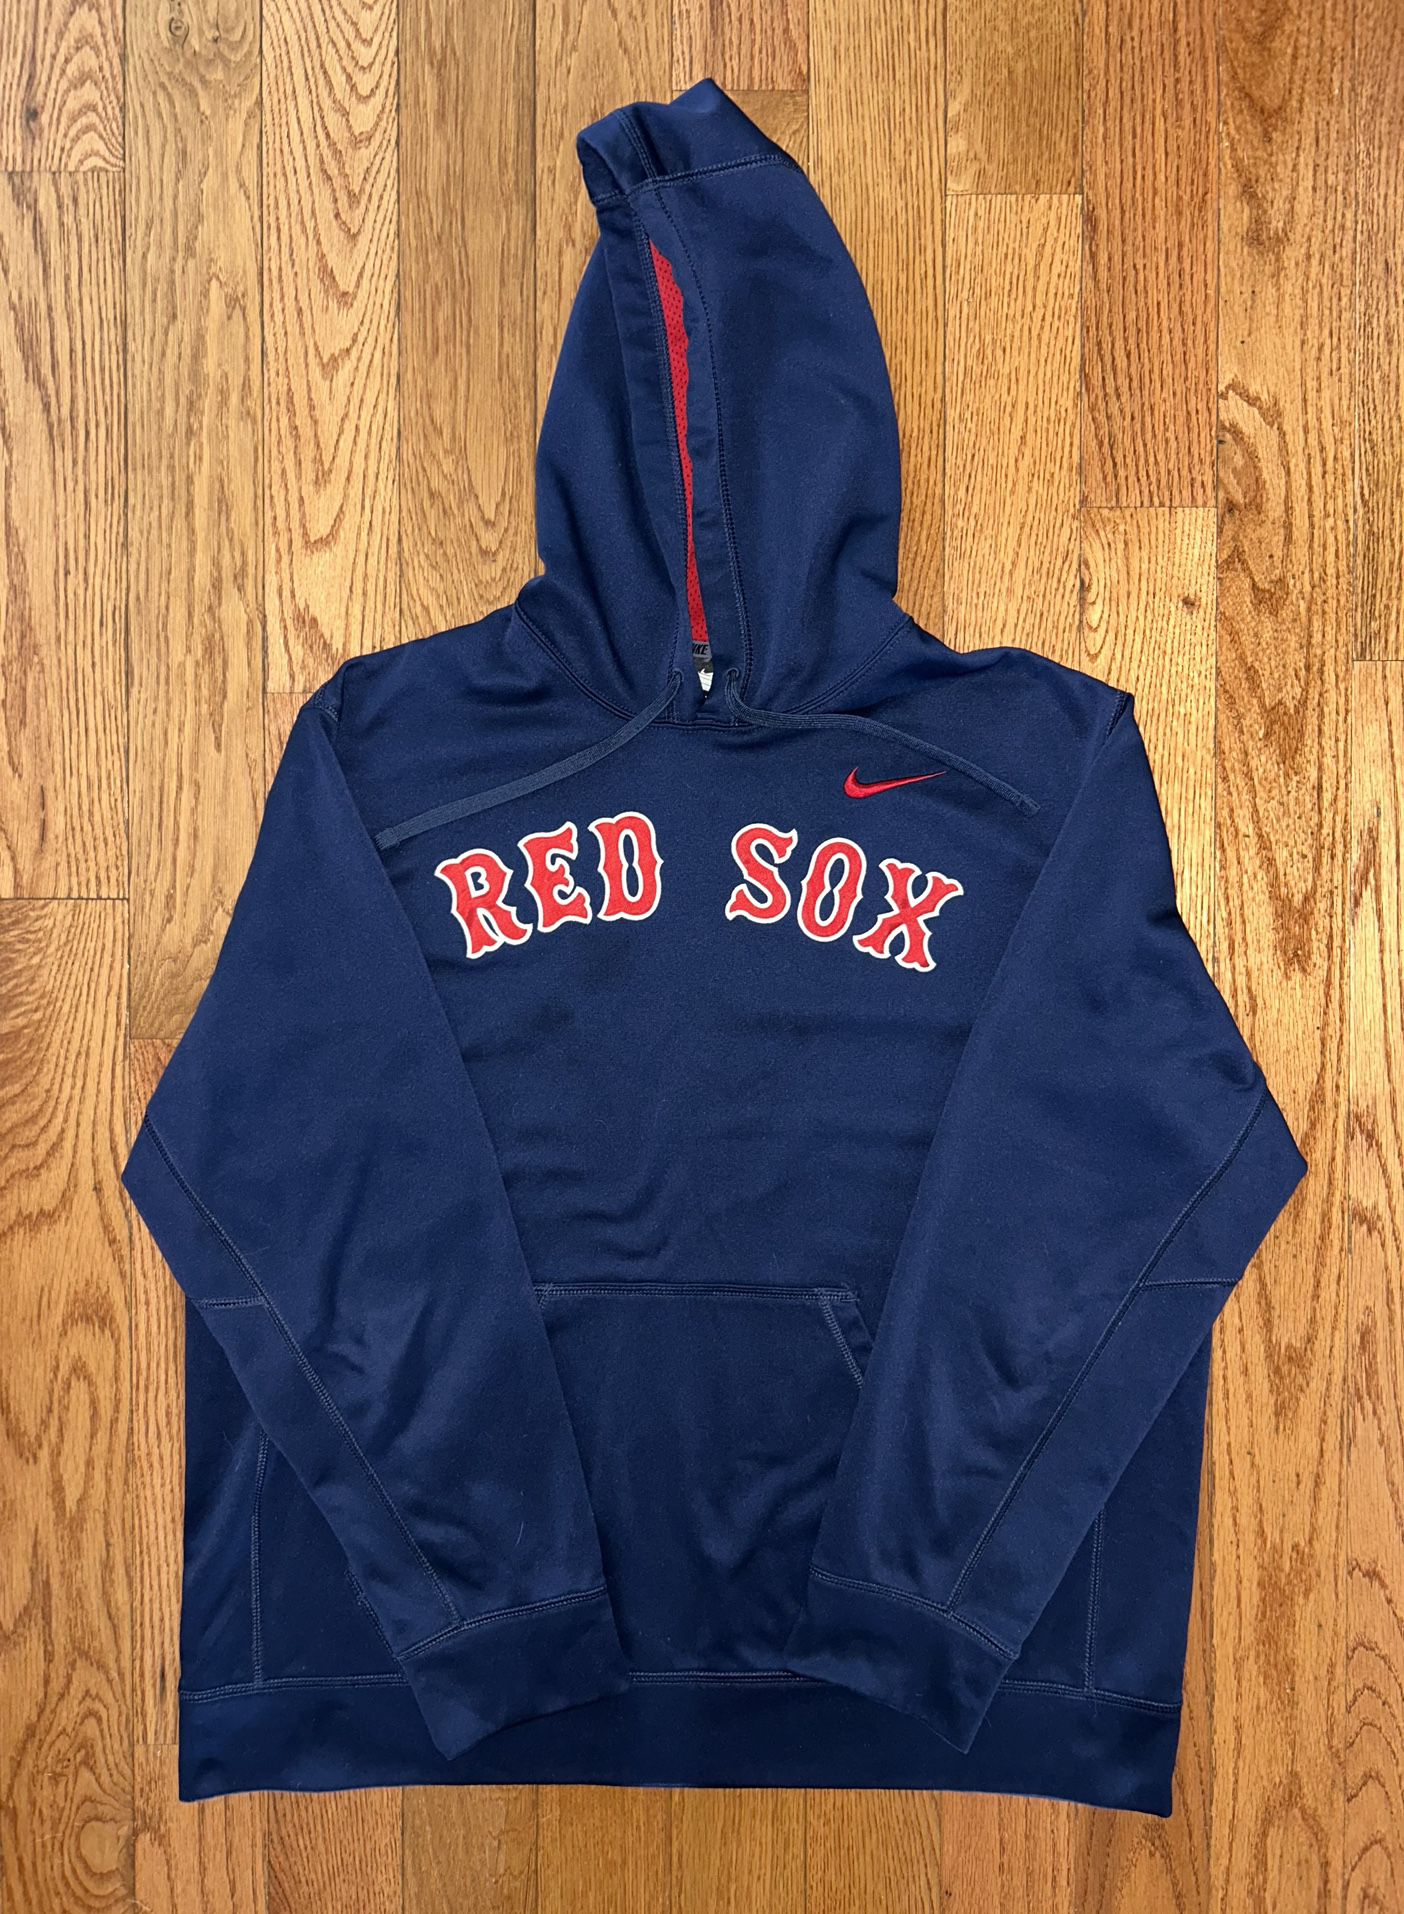 Boston Red Sox Nike Therma-Fit Sewn Hoodie Size XL